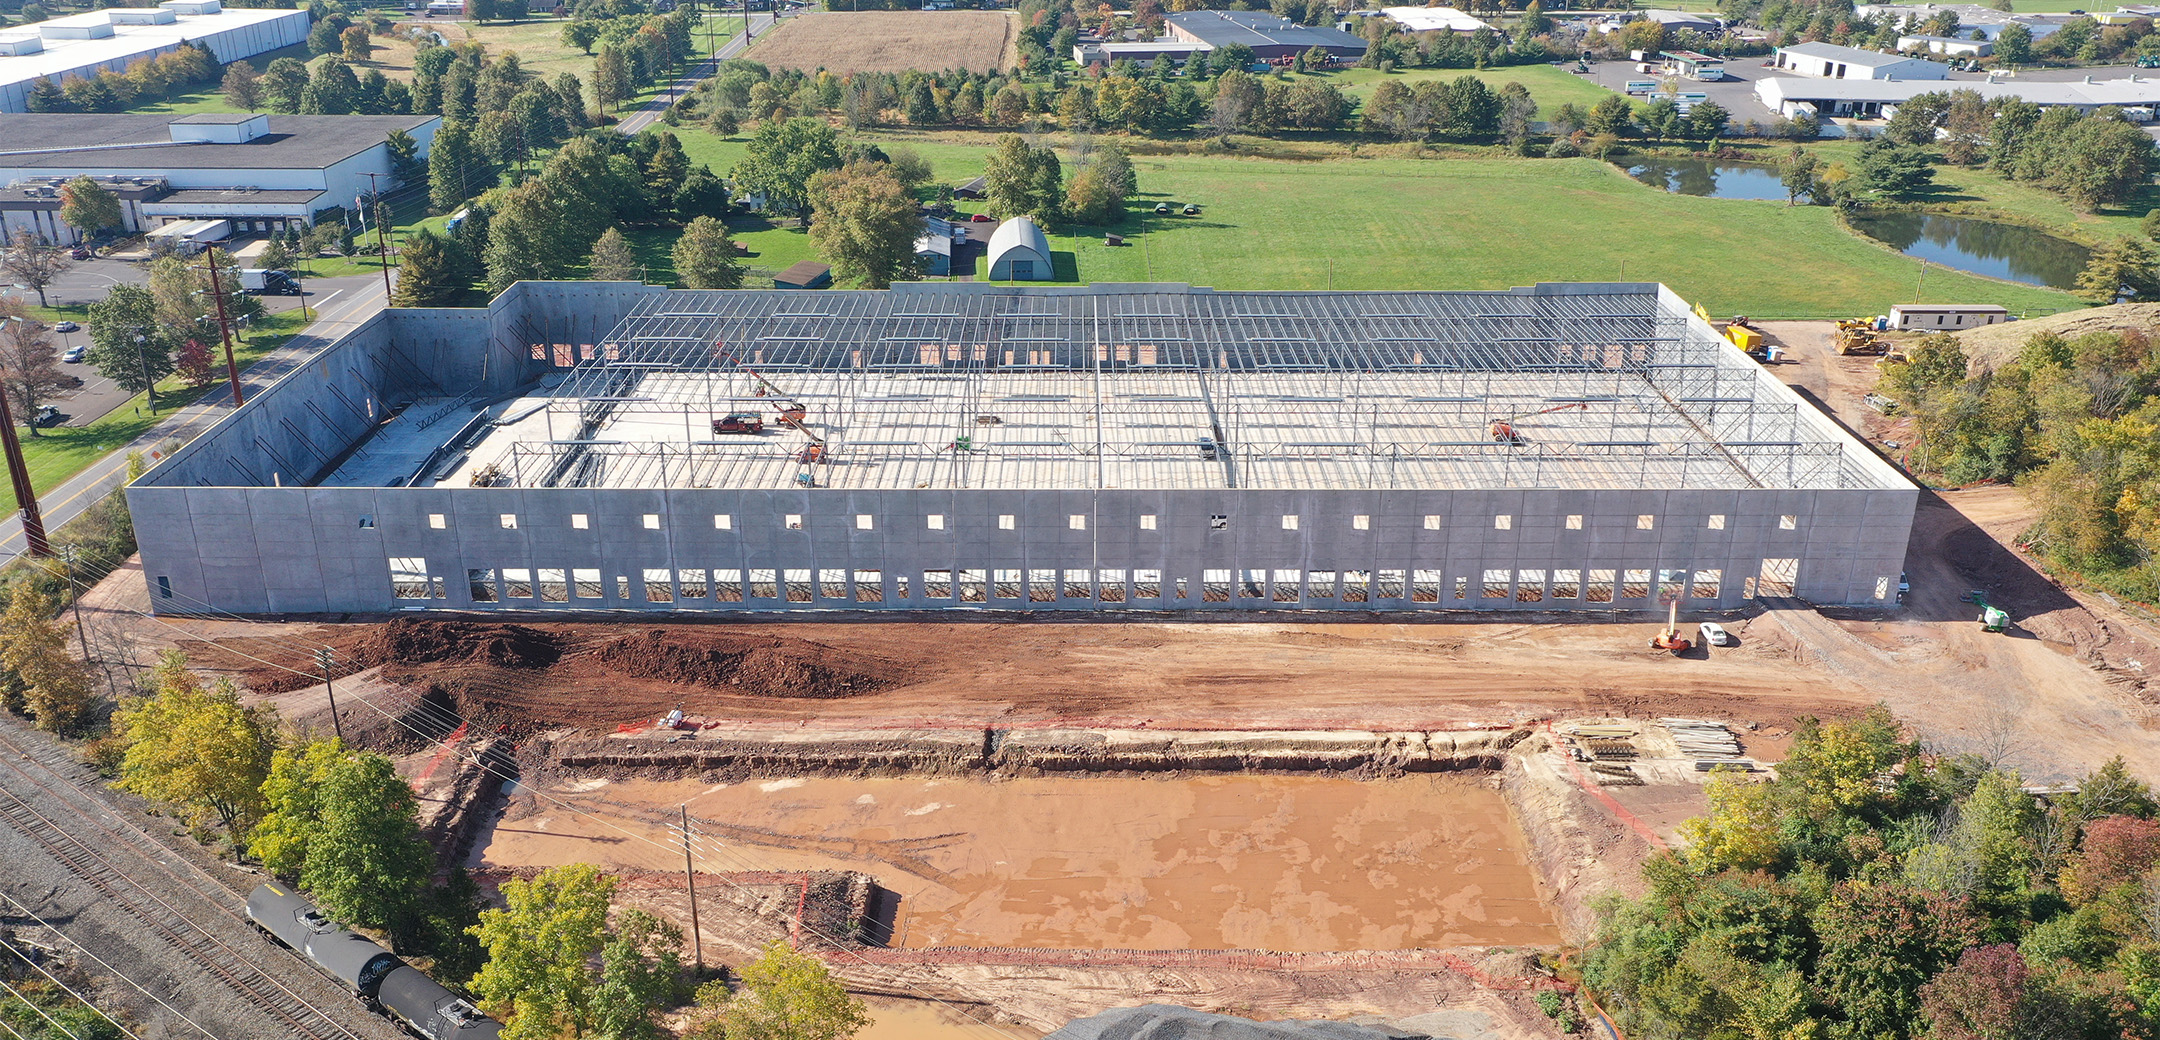 An aerial drone shot of the construction site of North Penn Logistics Park